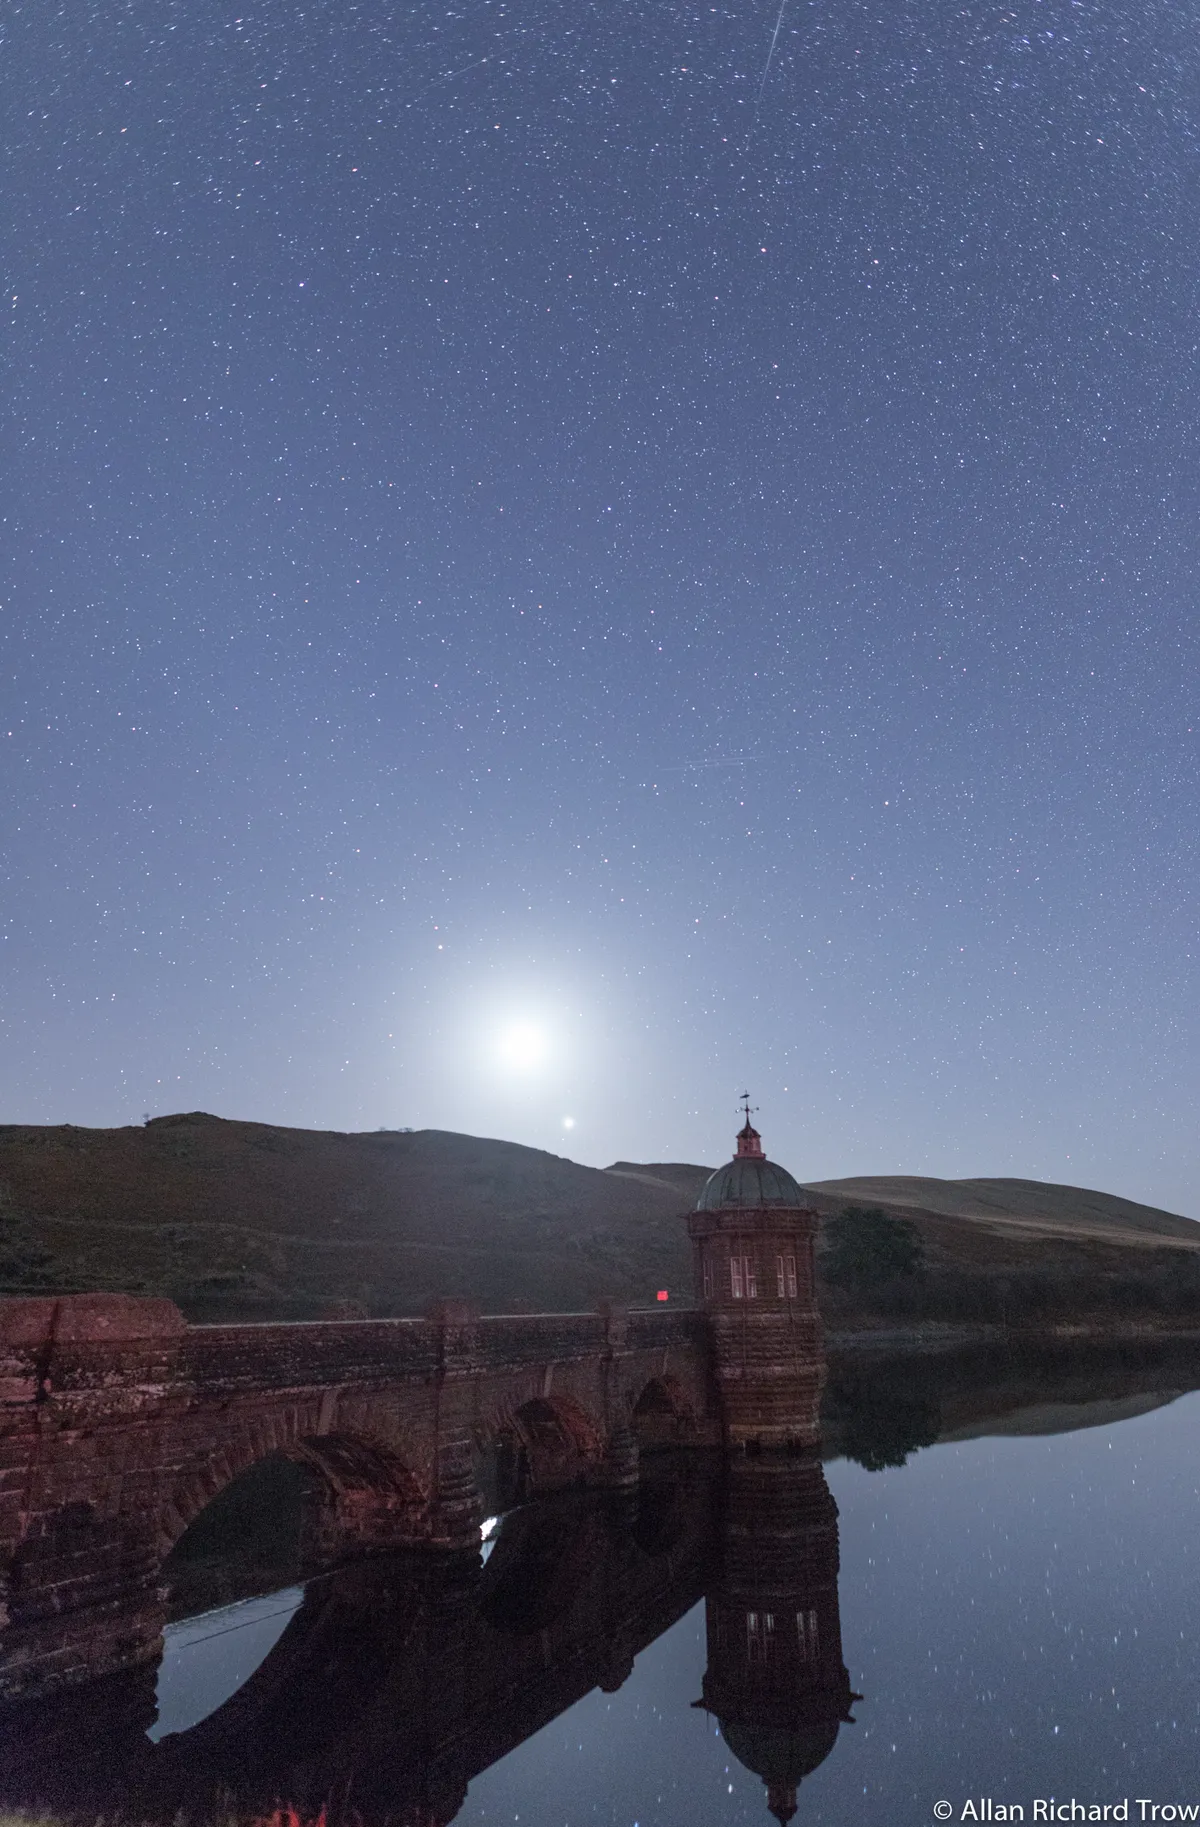 Mystical Waters by Allan Trow, Elan Valley, Wales, UK. Equipment: Canon 6D, Sigma 20mm Art lens at F2.8.